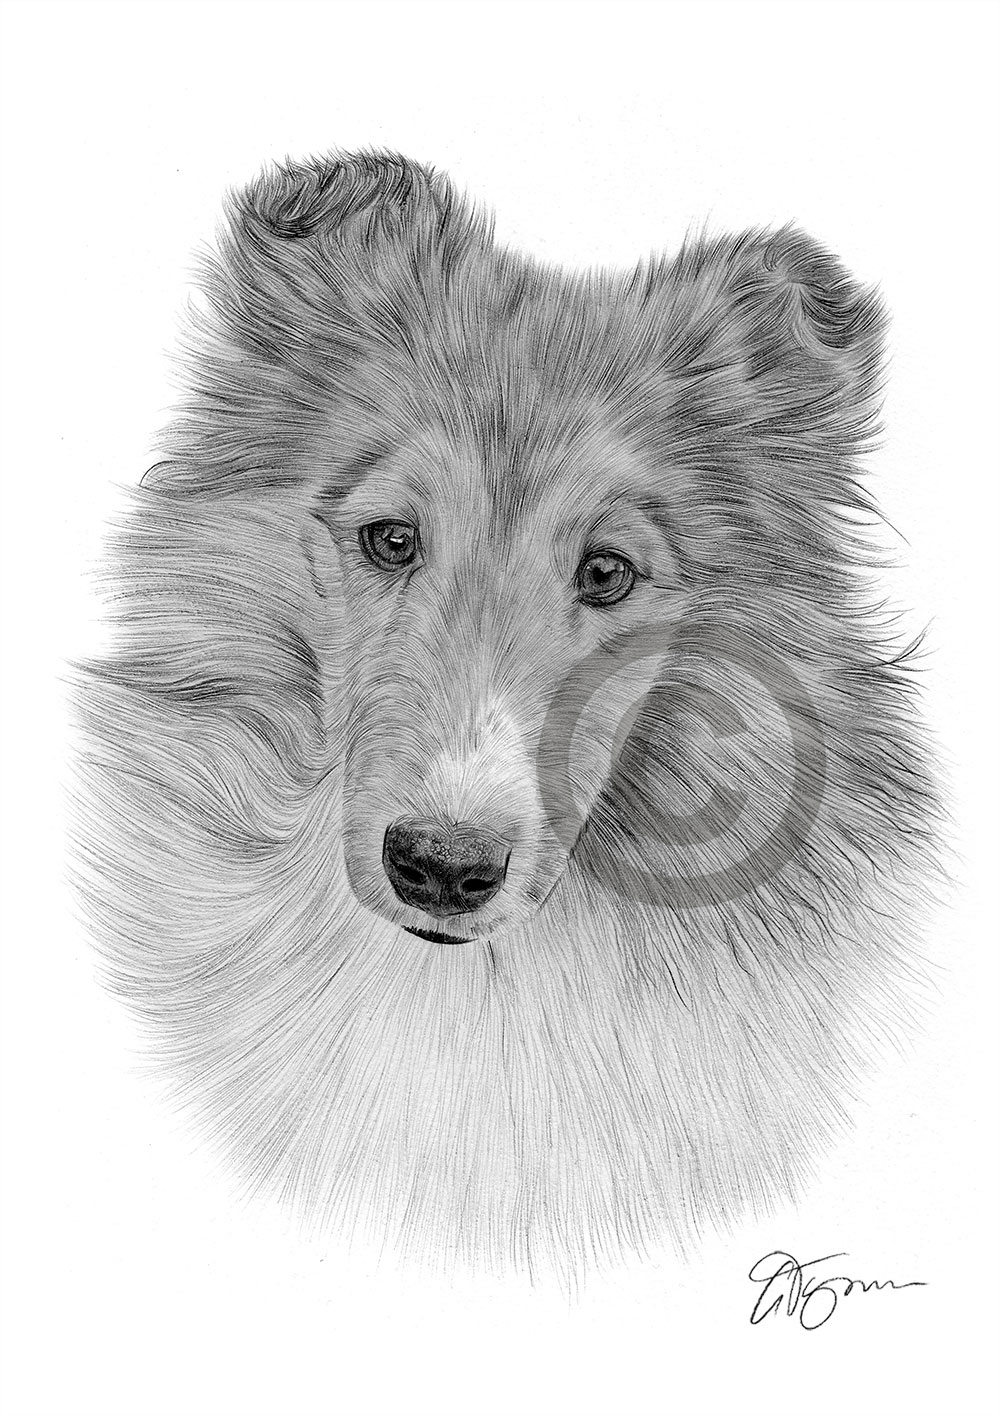 Pencil drawing of a young Sheltie by artist Gary Tymon